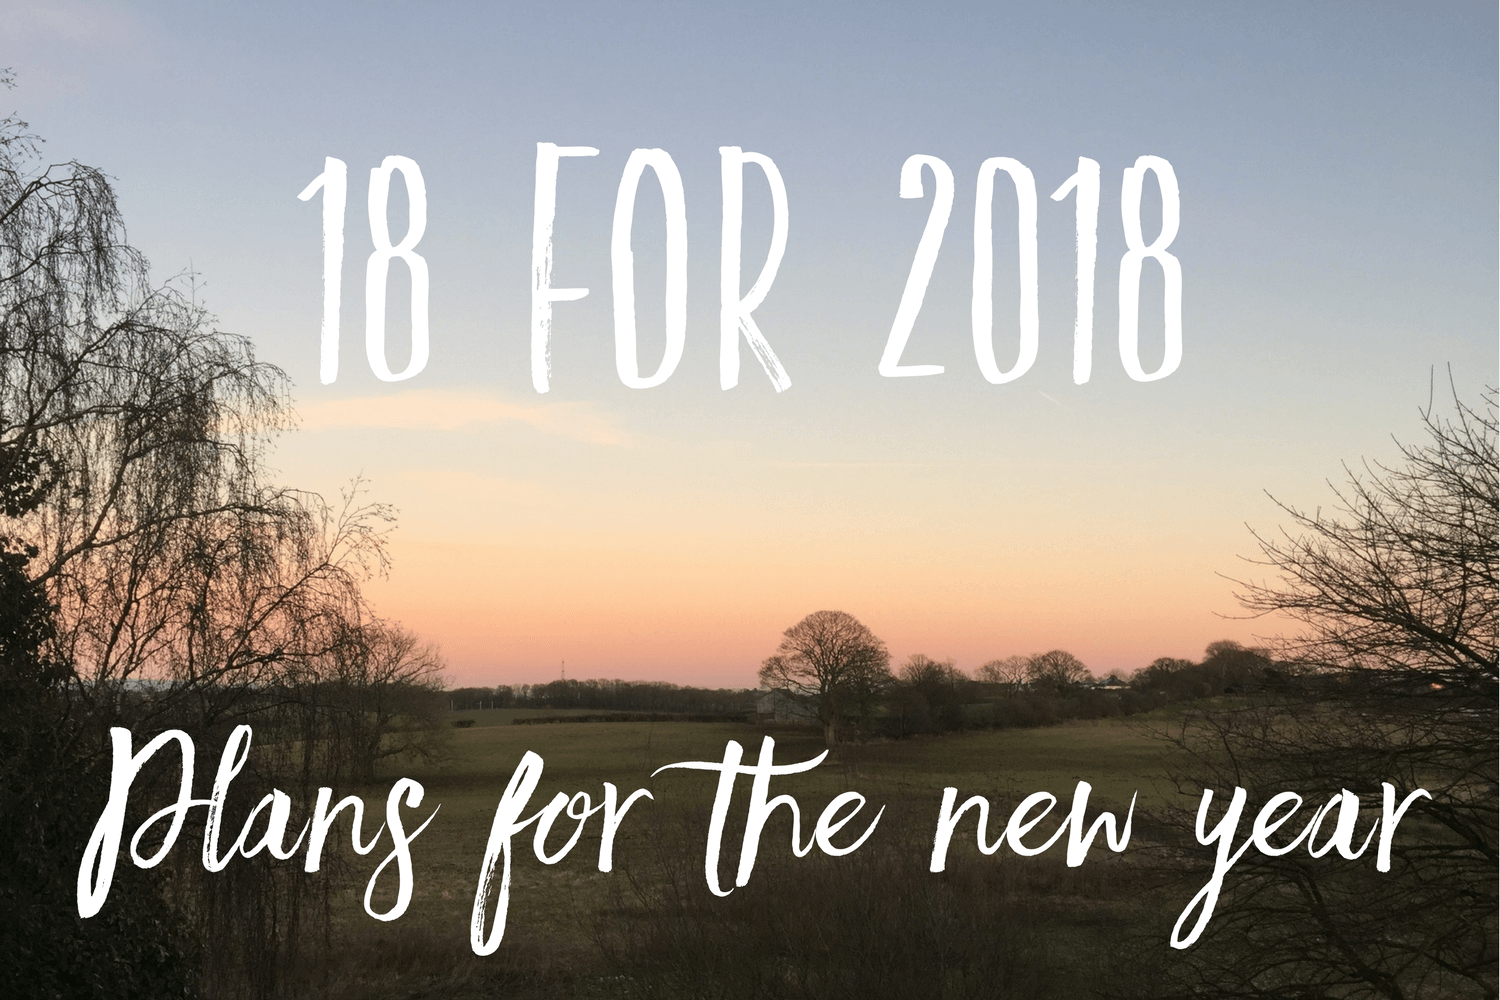 18 for 2018 - Plans for the new year